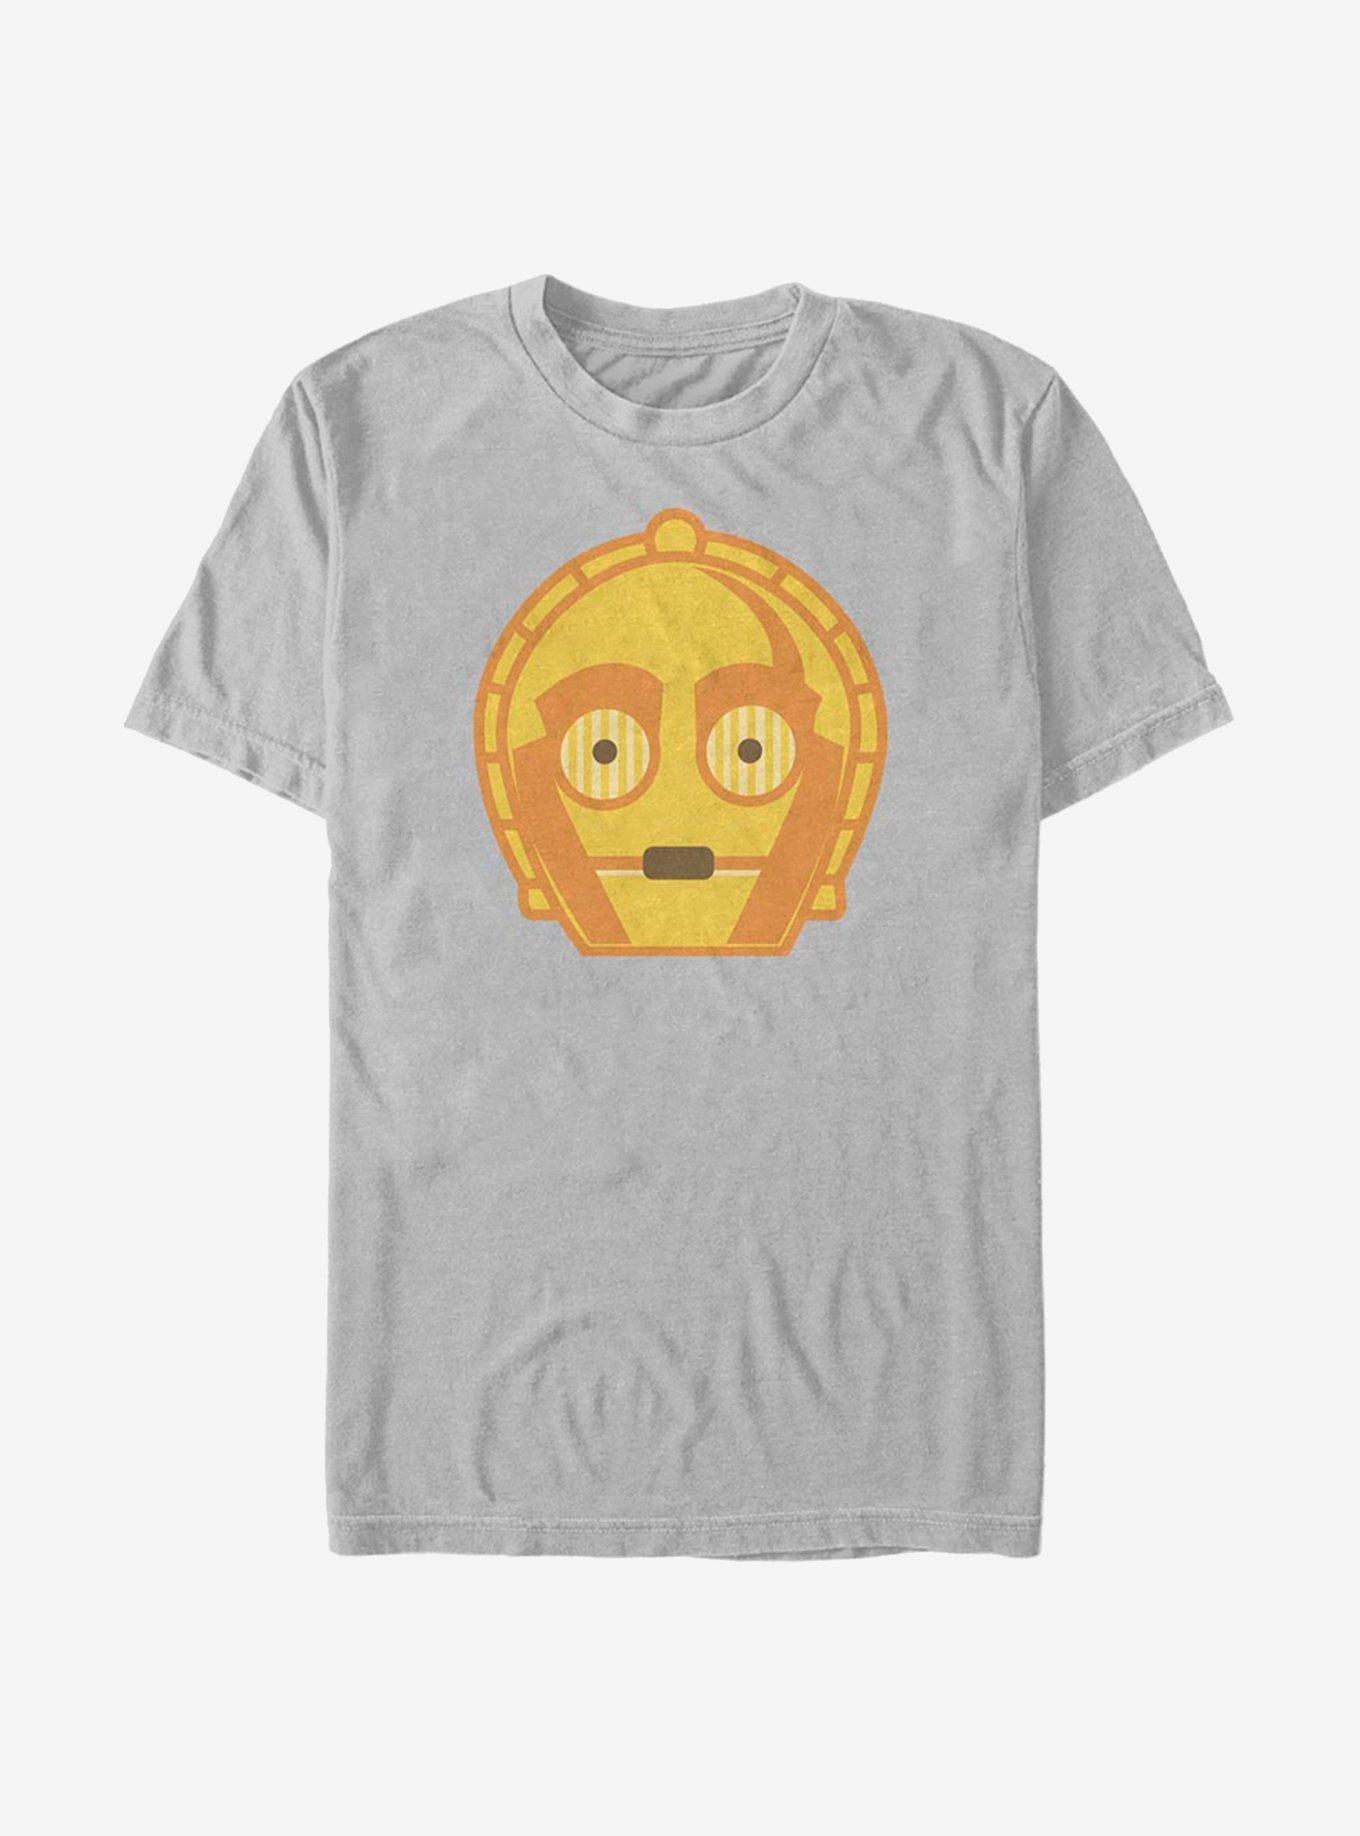 Star Wars Little Story-C-3PO T-Shirt, SILVER, hi-res